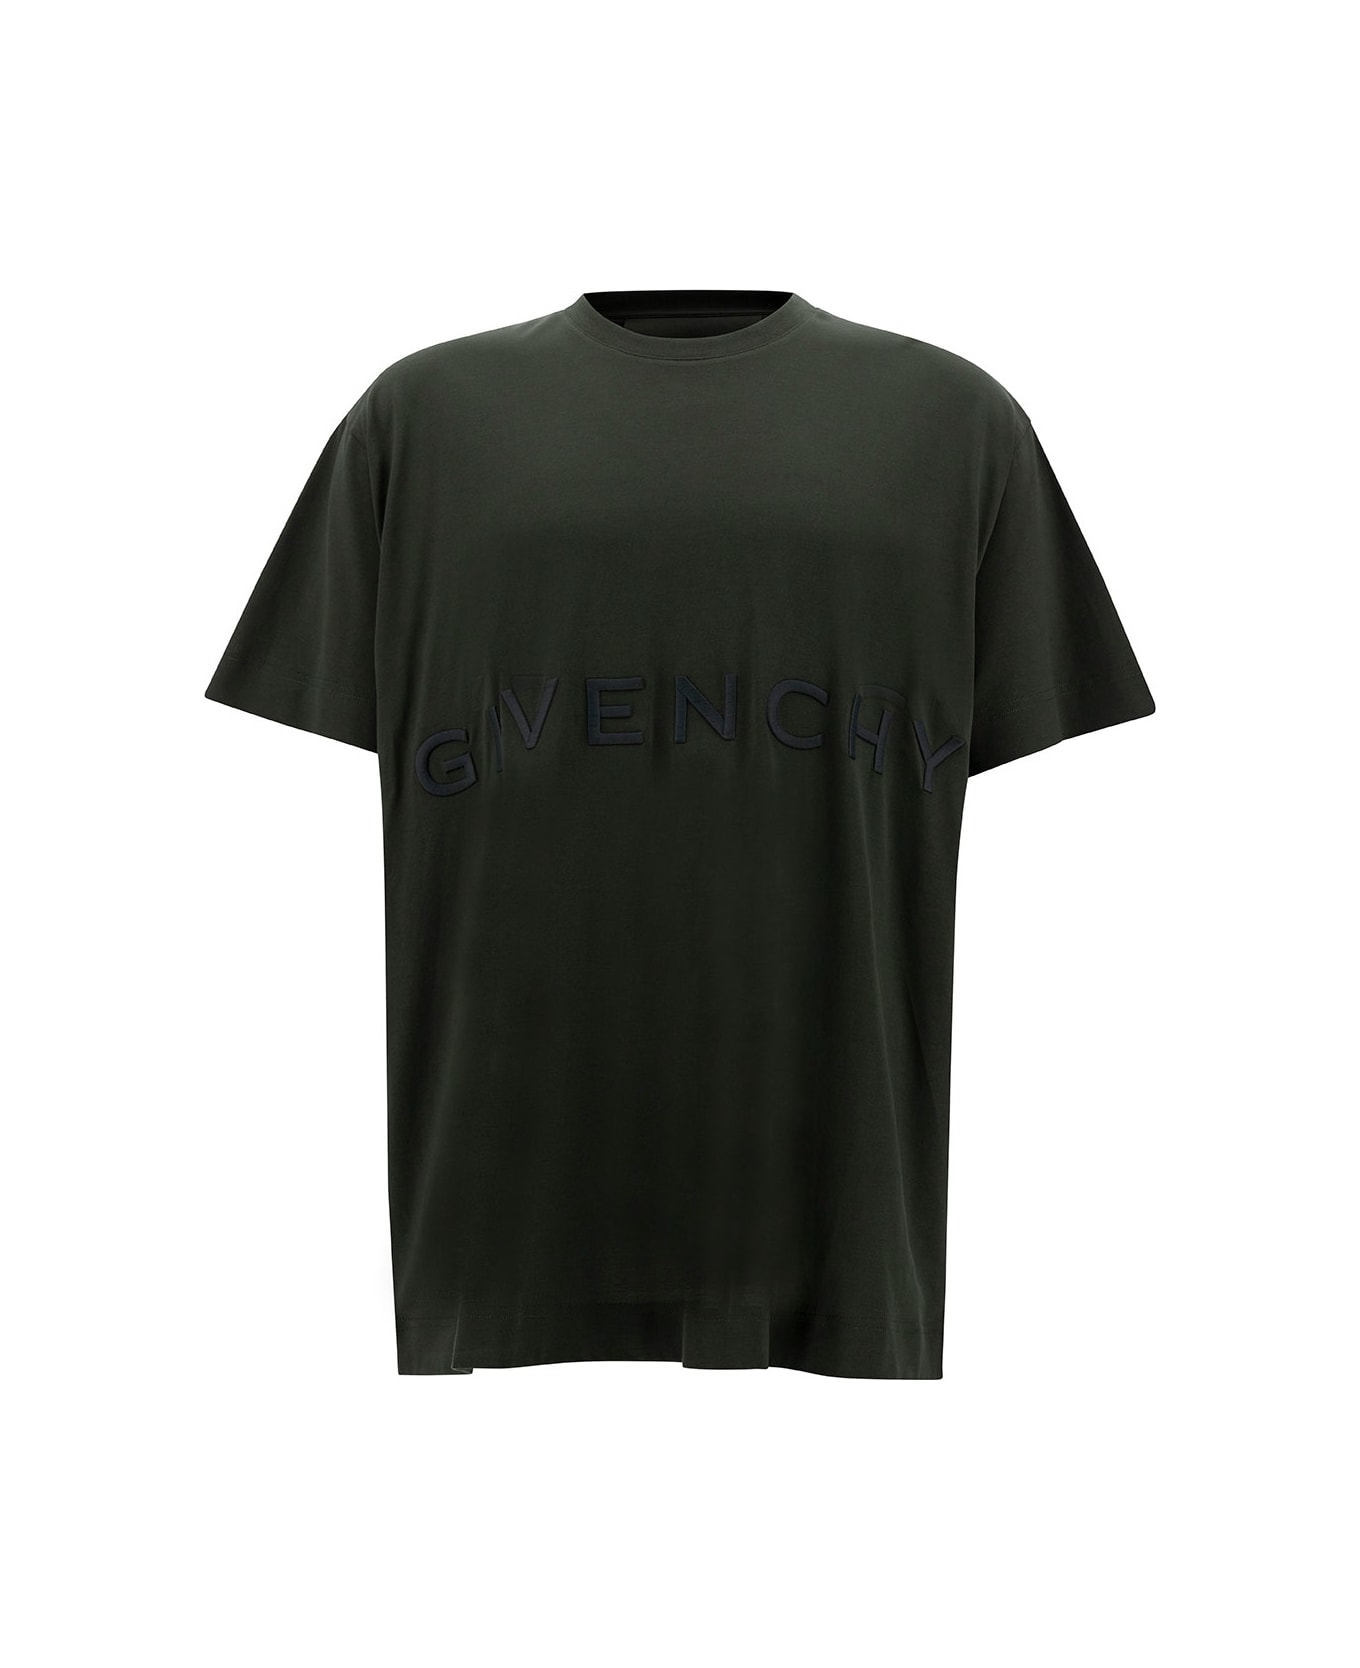 Givenchy Oversized T-shirt - Green シャツ